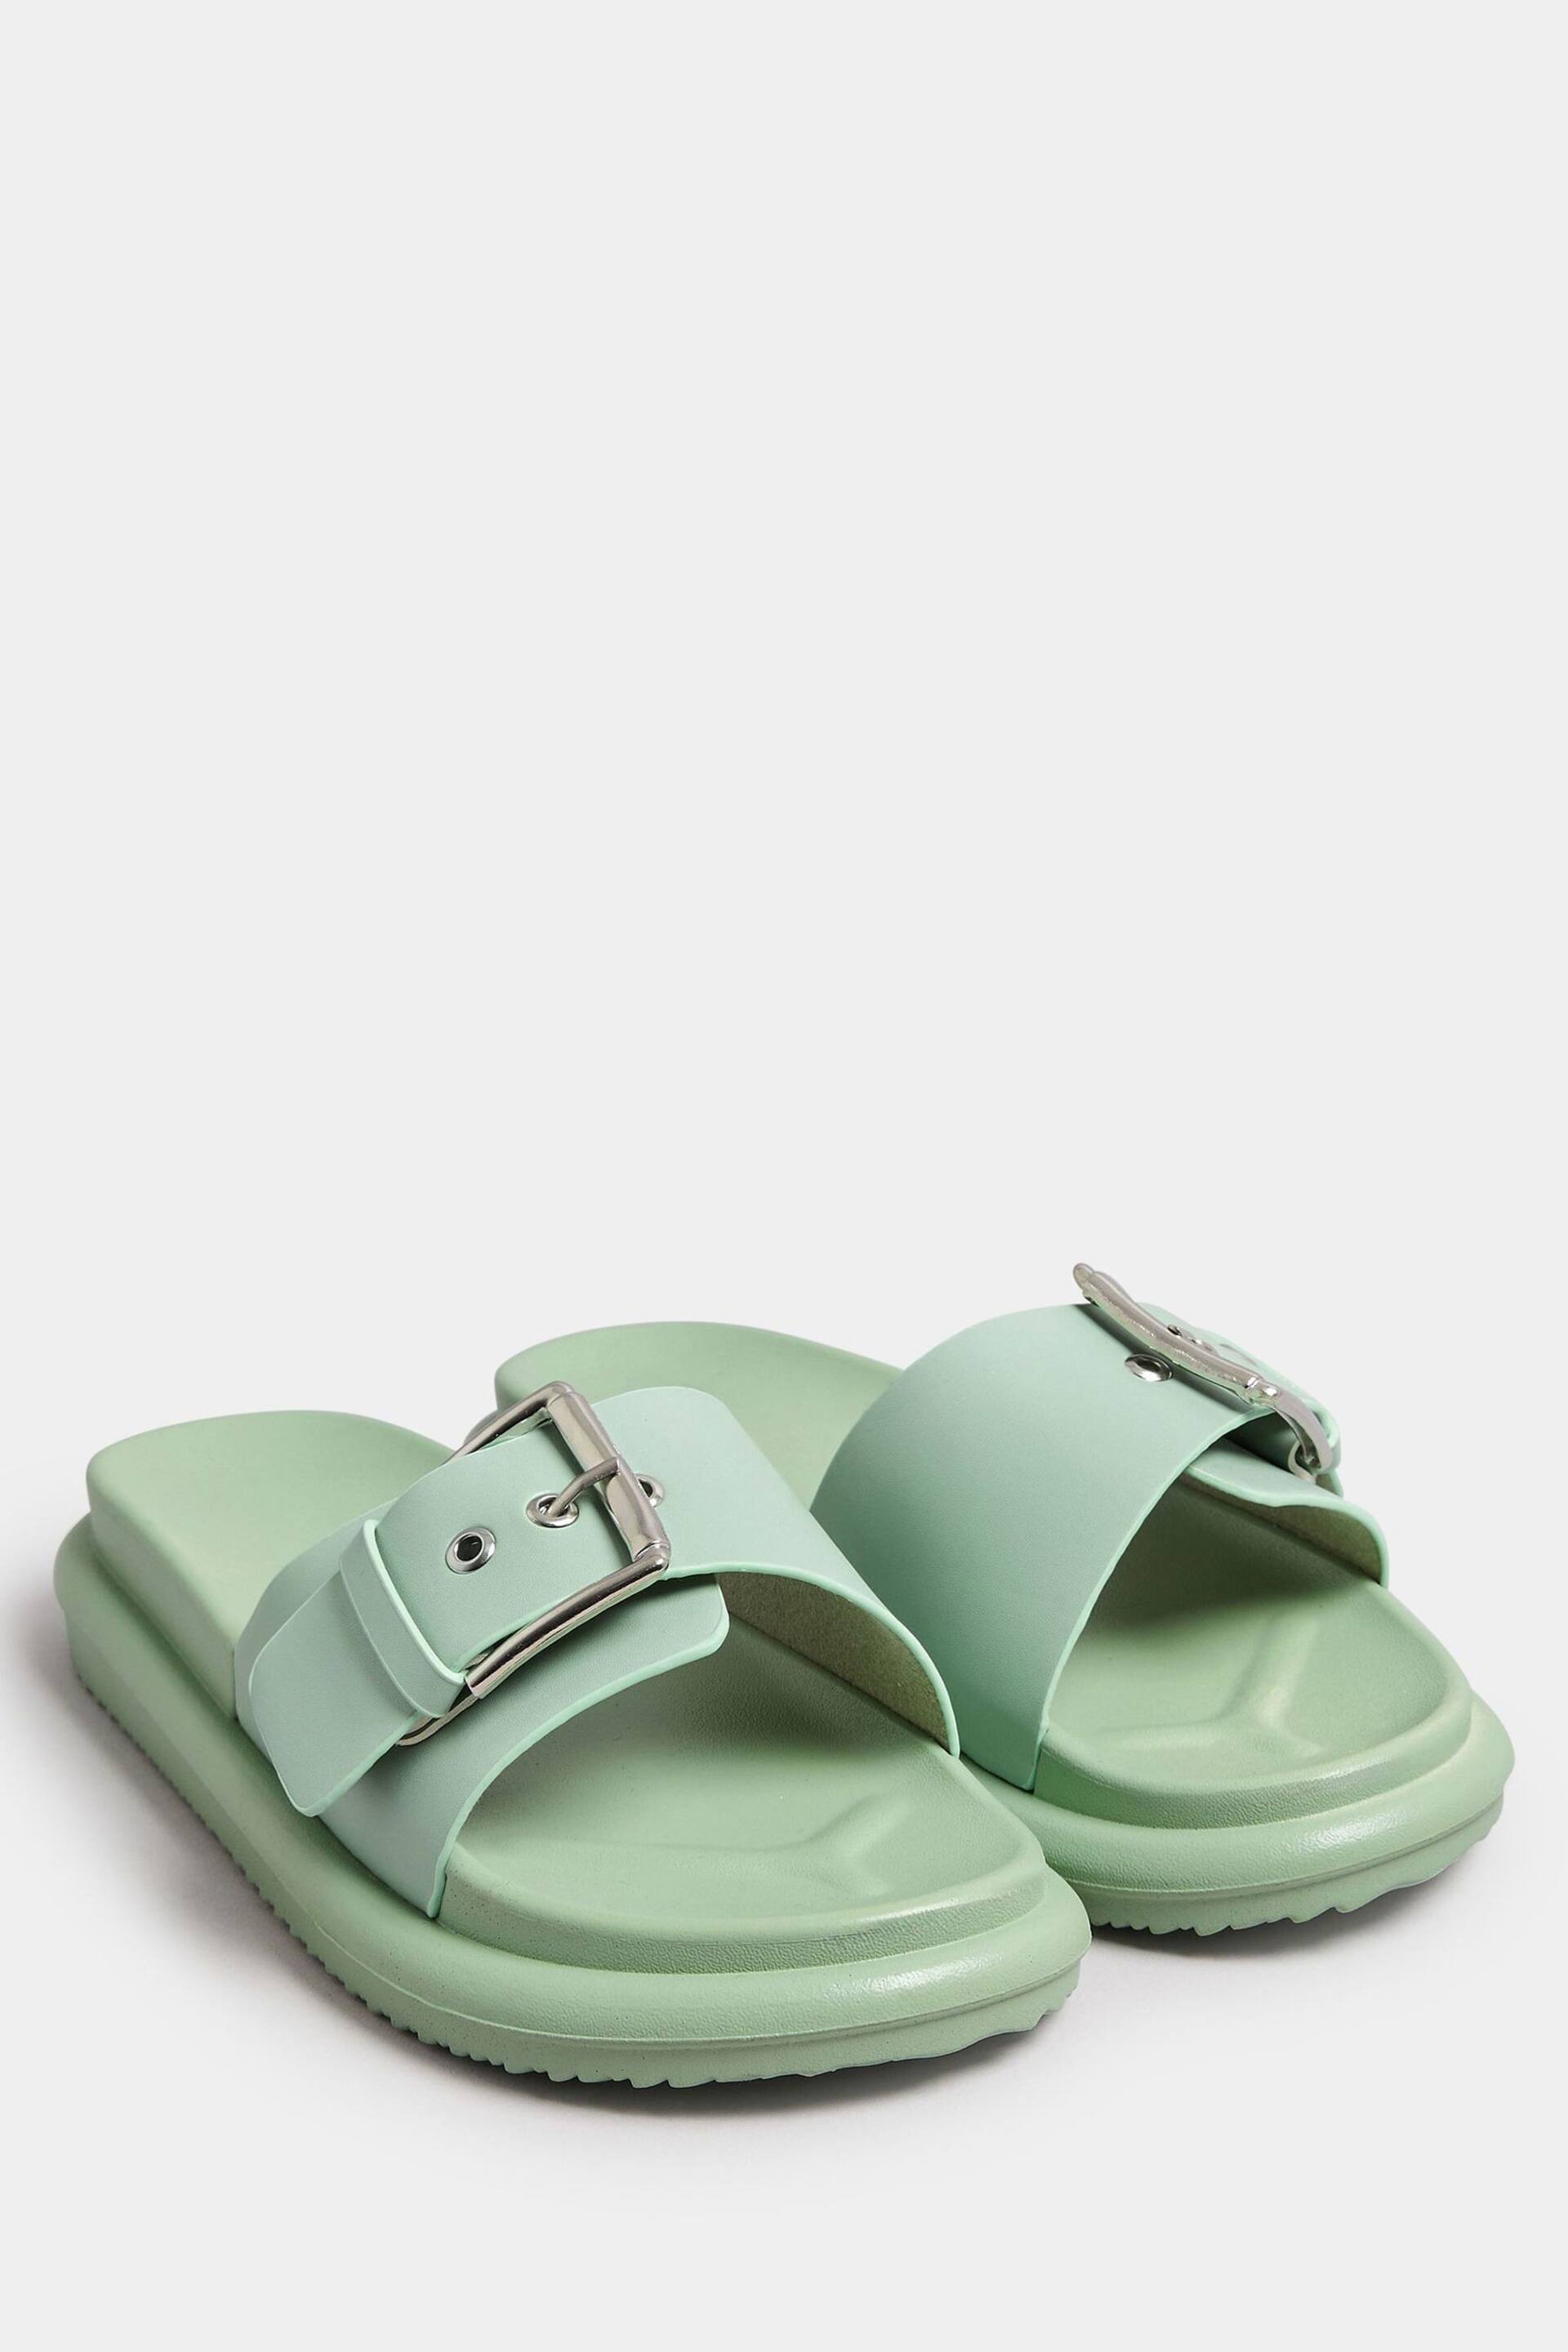 Yours Curve Green Buckle Strap Mule Sandal In Wide E Fit - Image 2 of 5